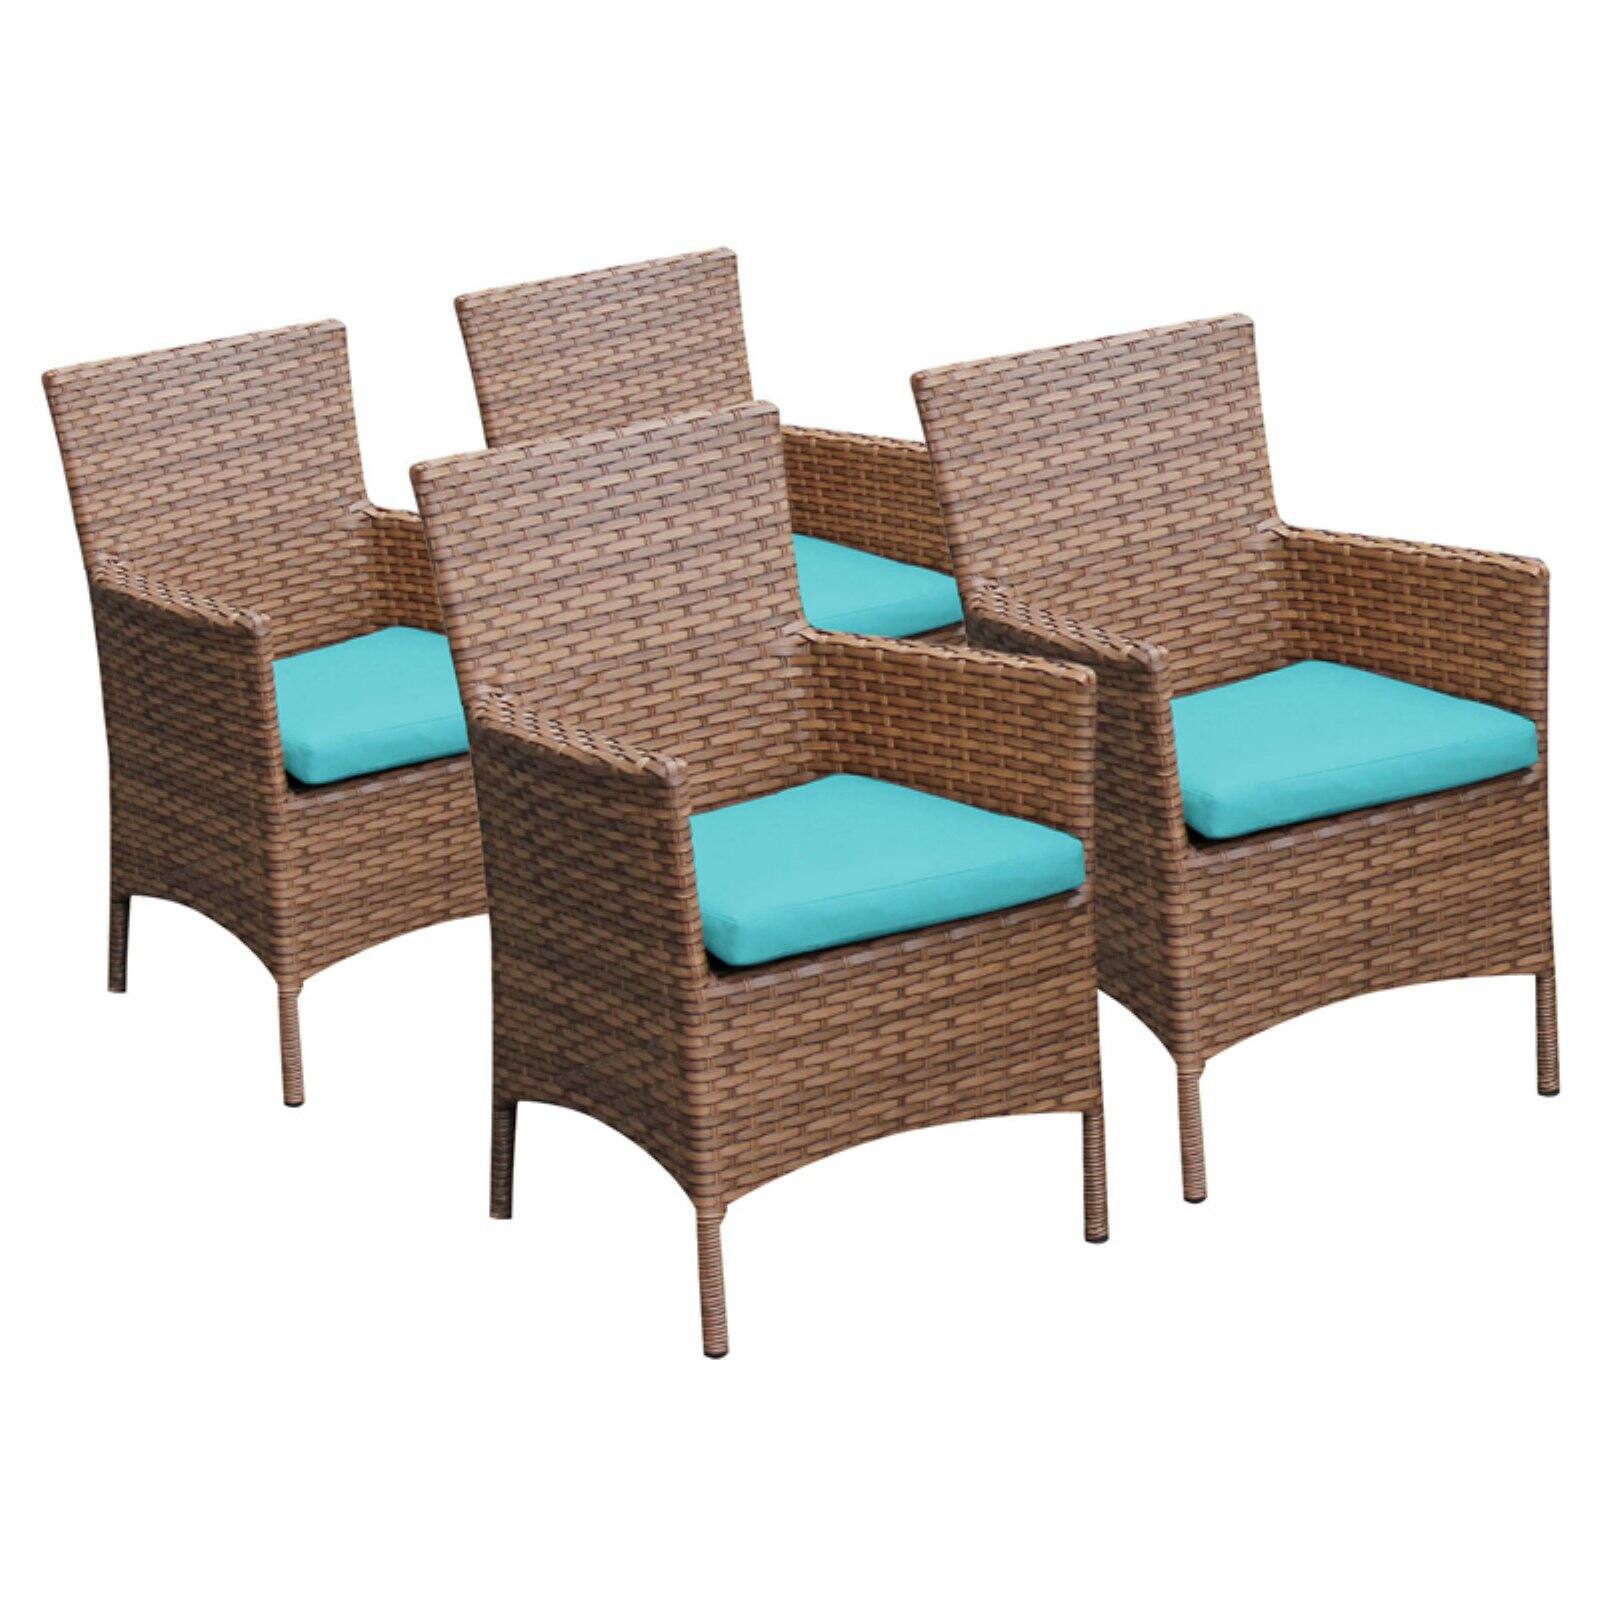 TK Classics Laguna Outdoor Dining Chairs - Set of 4 with 8 Cushion Covers - image 2 of 2